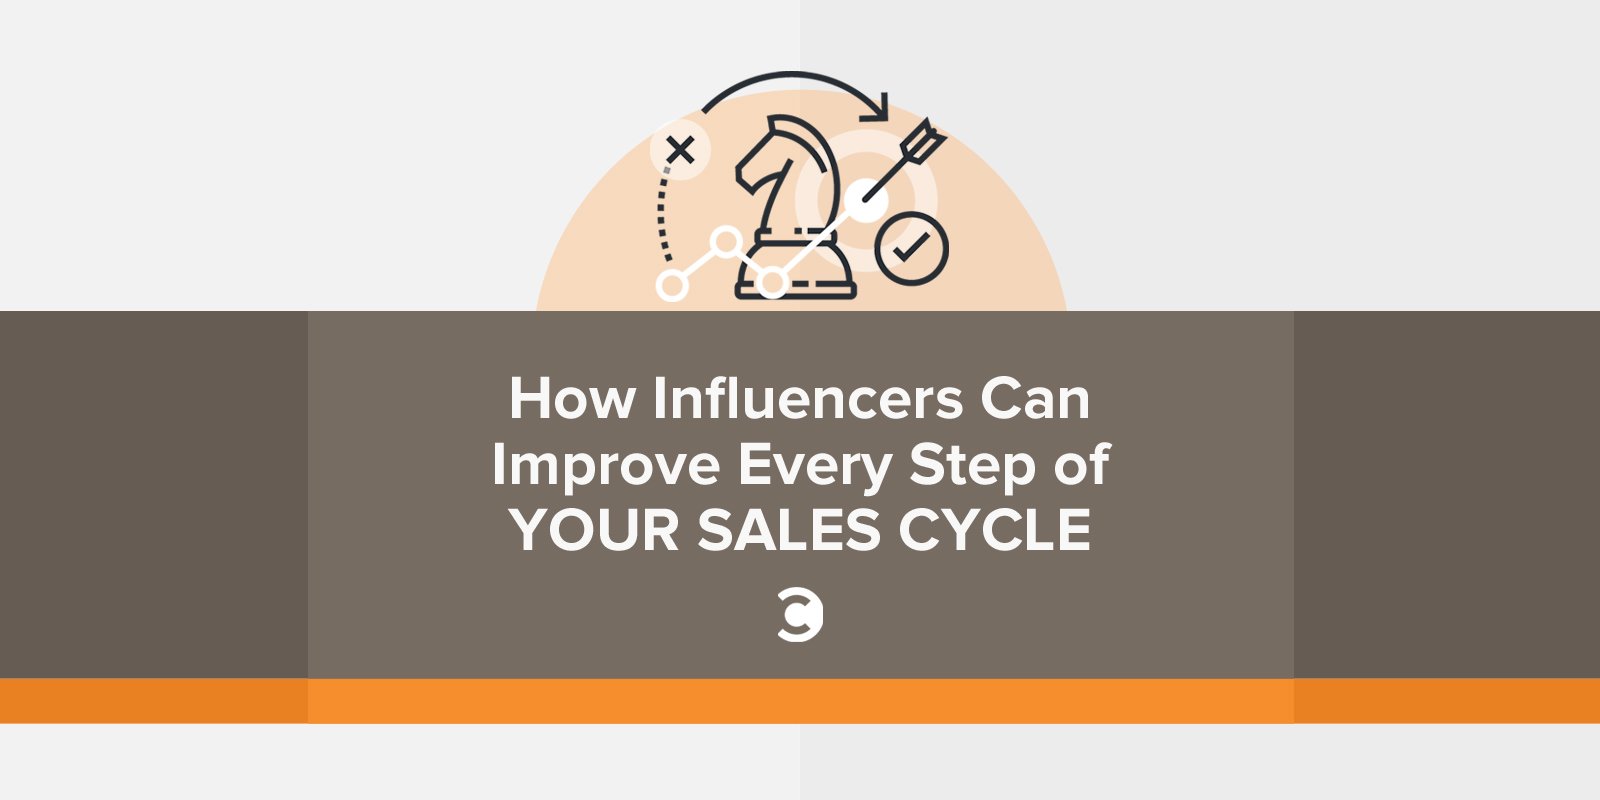 How Influencers Can Improve Every Step of Your Sales Cycle